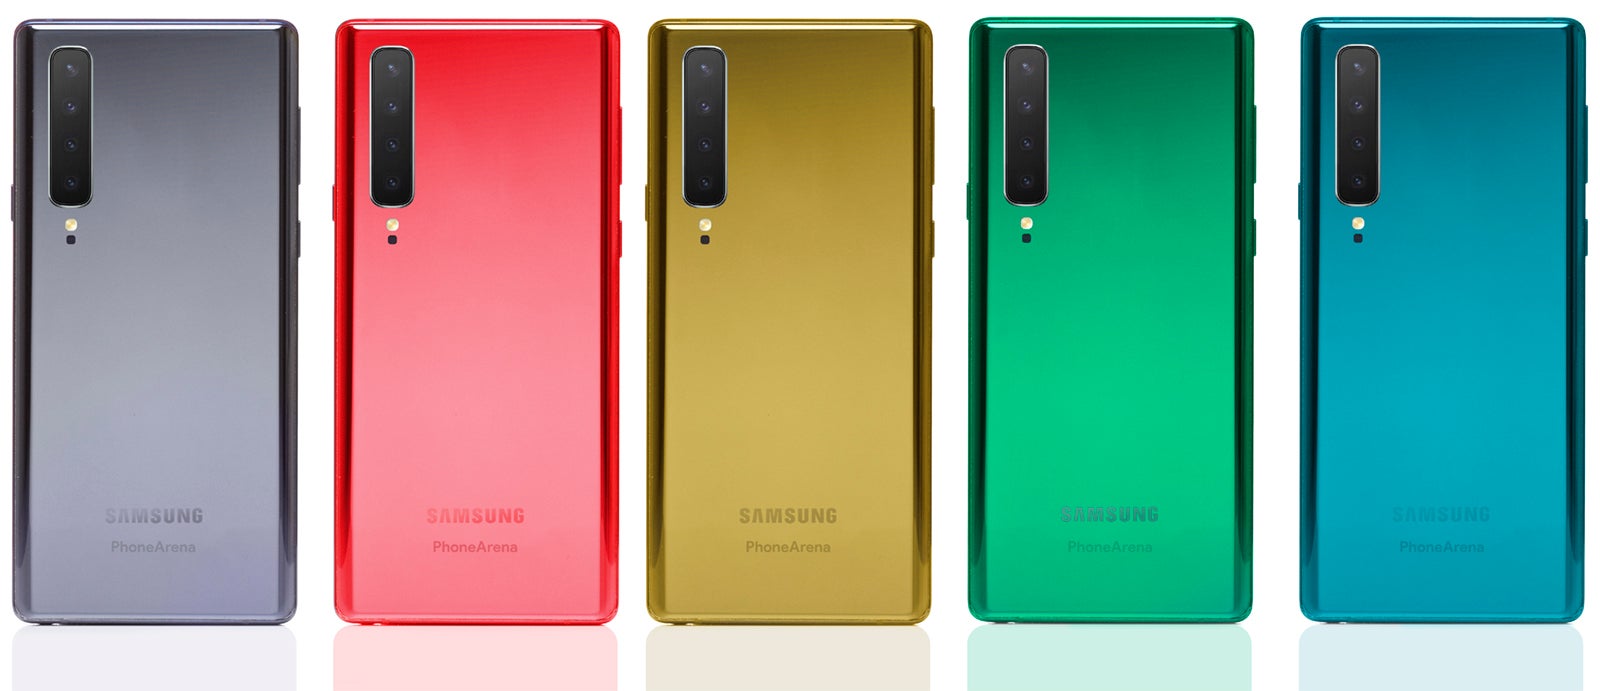 Samsung Galaxy Note 10 may introduce a controversial design change